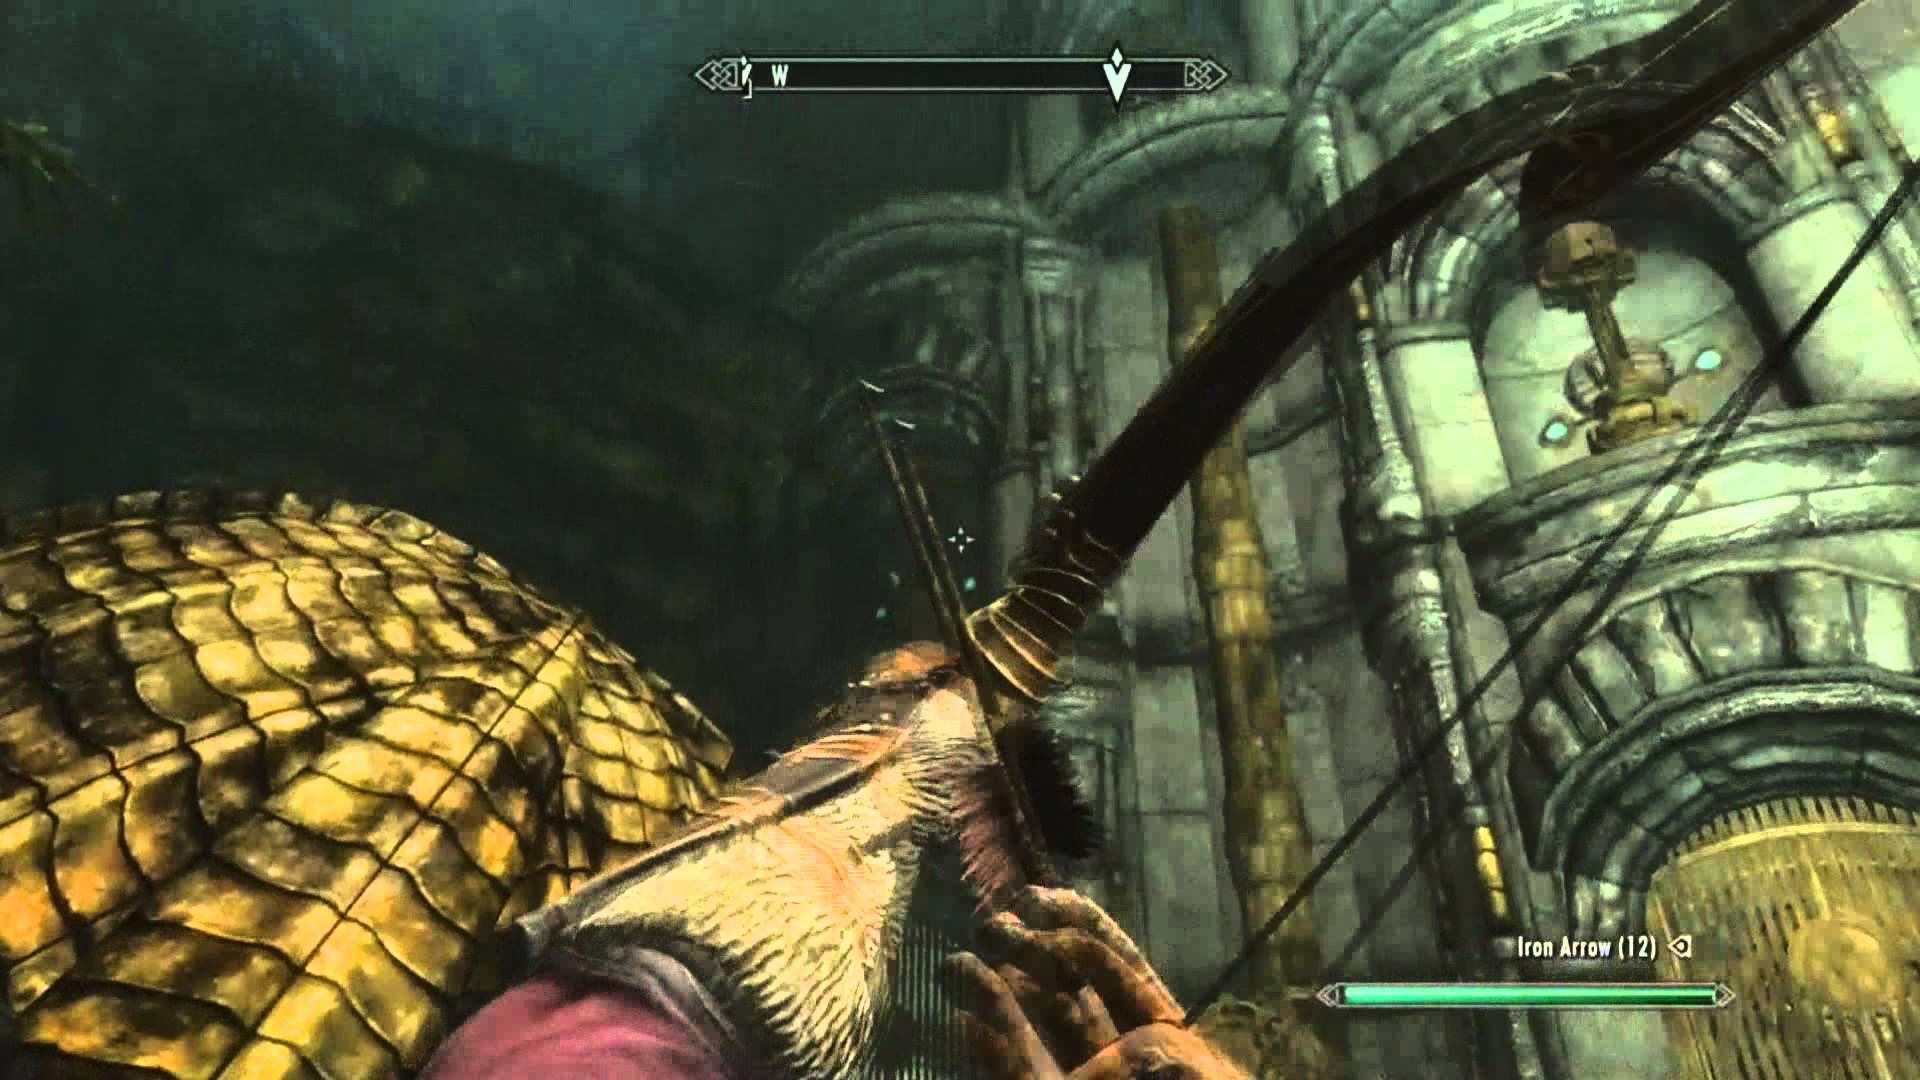 15 AWFUL Skyrim Items Everyone Uses (Even Though They Have The Worst Stats)